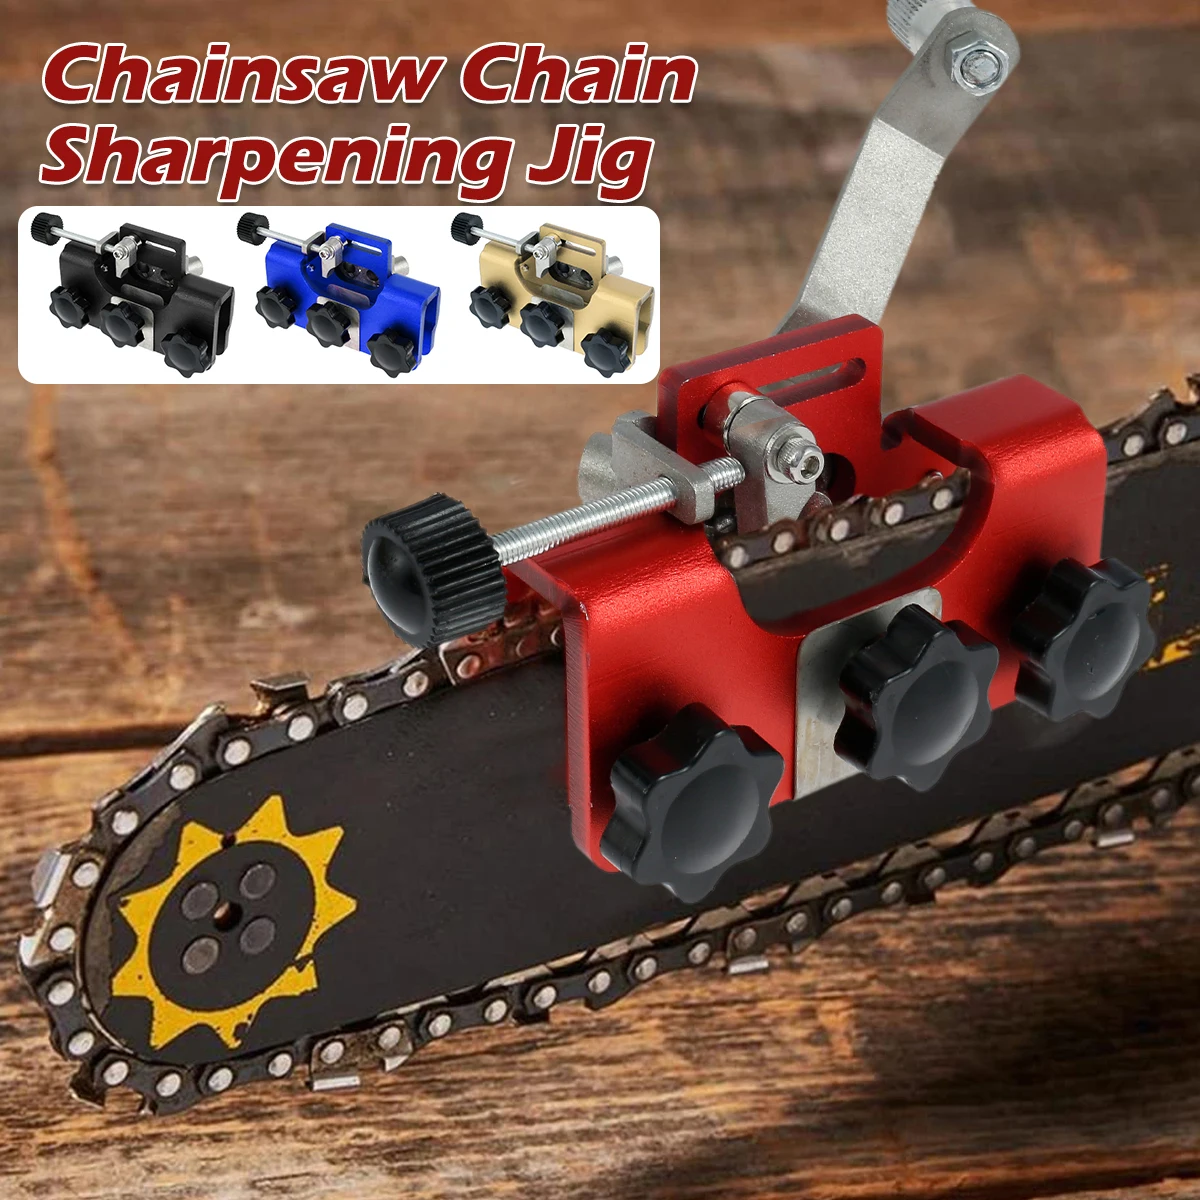 

Portable Chainsaw Sharpener Jig Manual Chainsaw Chain Sharpening For Most Chain Saws And Electric Saws With Sharpening Heads